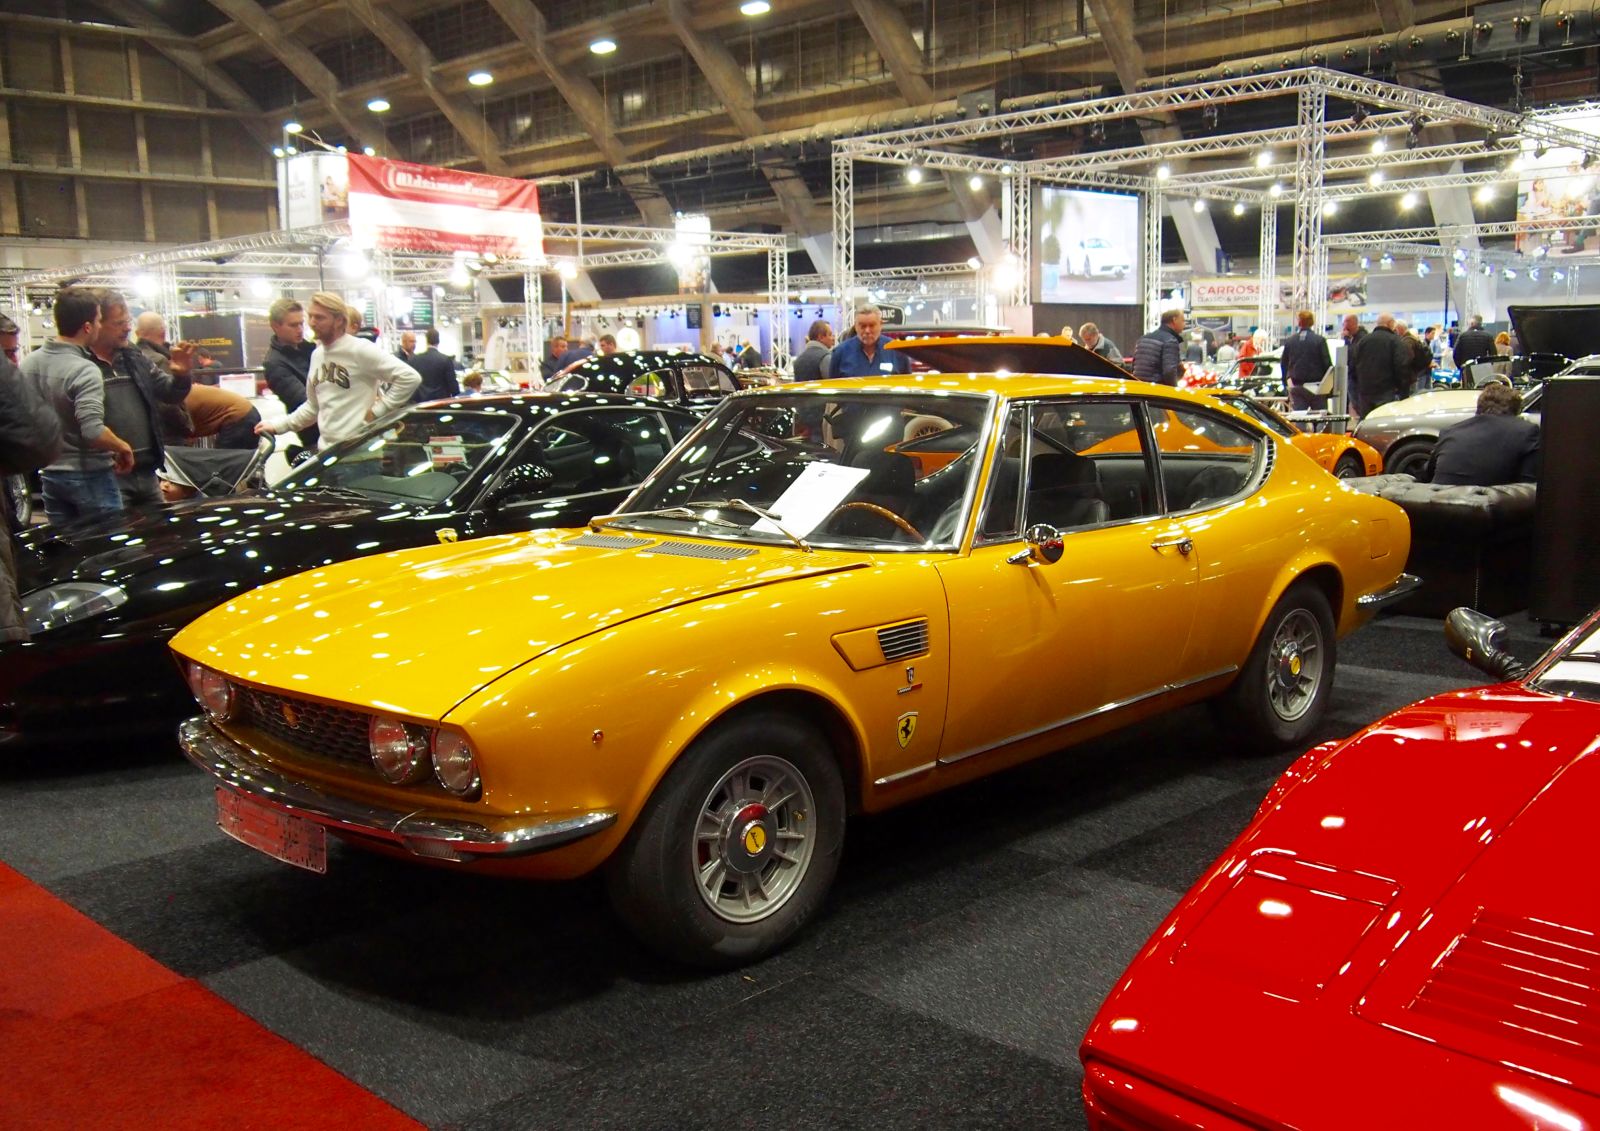 1967 Fiat Dino Coupé. I like it in yellow.